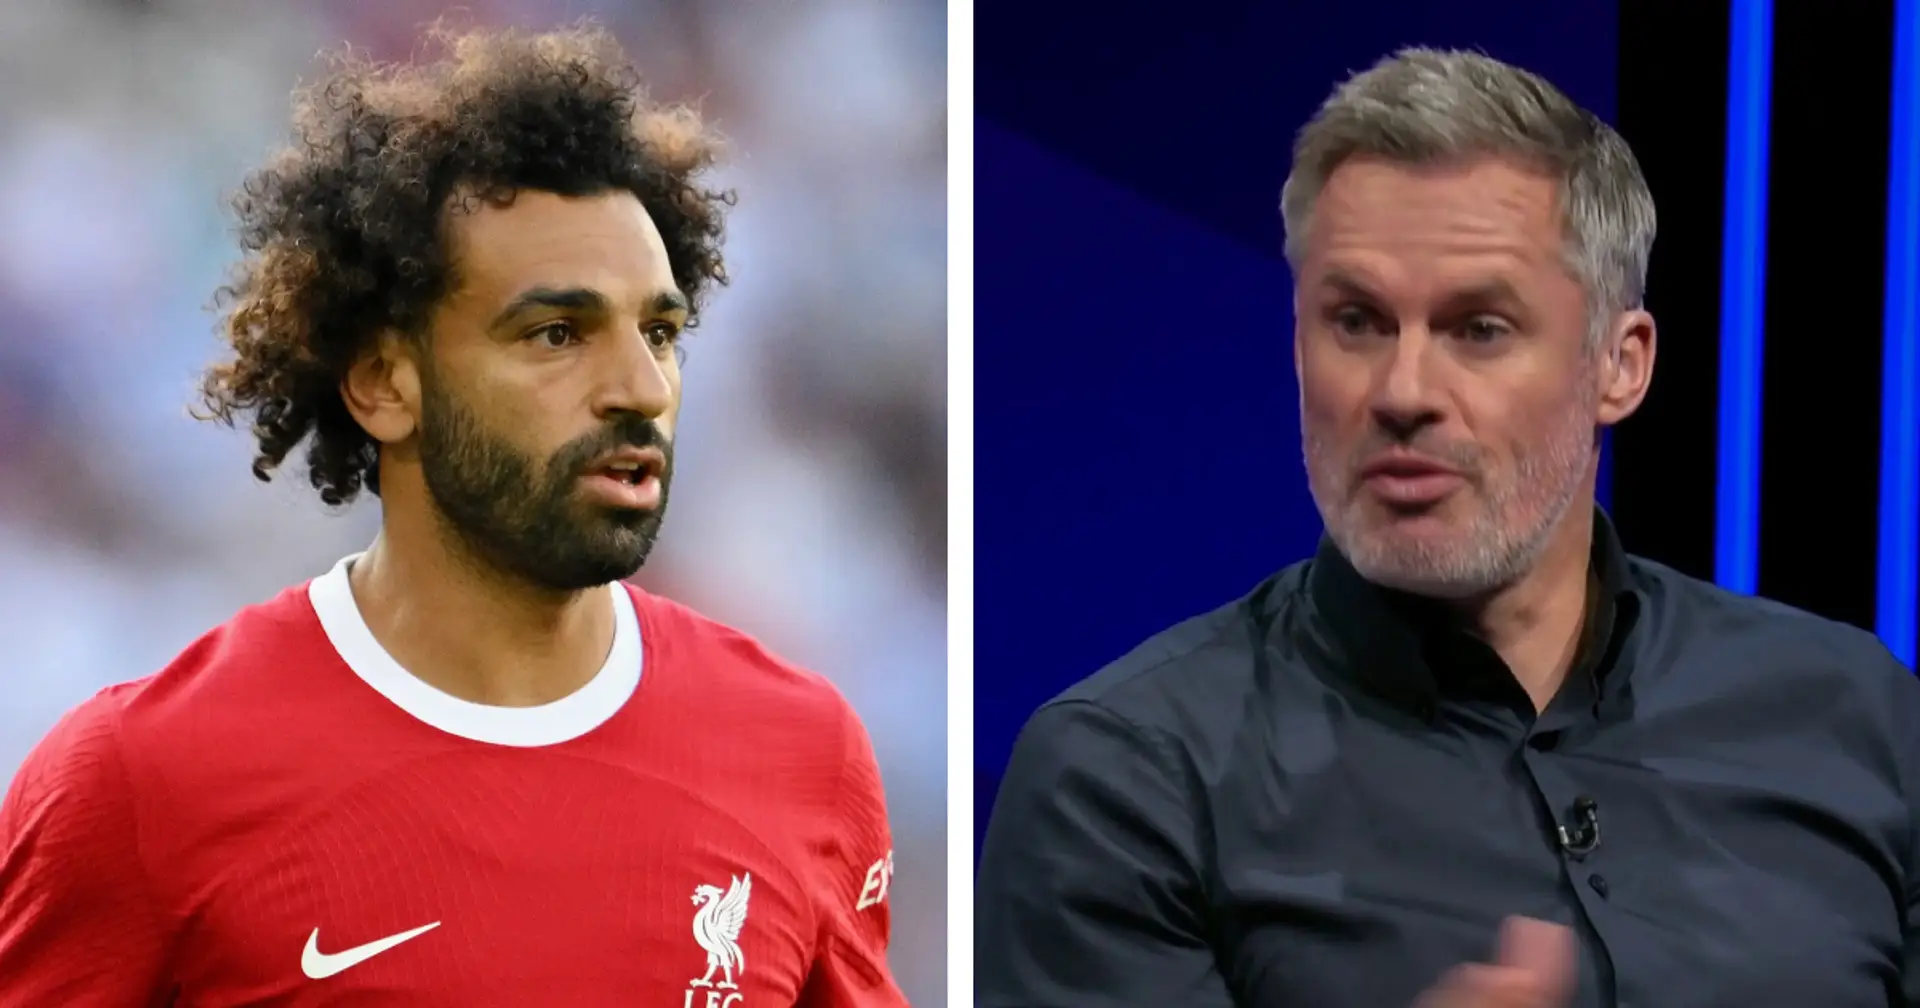 'They'd seriously think about it': Carragher explains why Liverpool would eventually sell Salah to Saudi Arabia